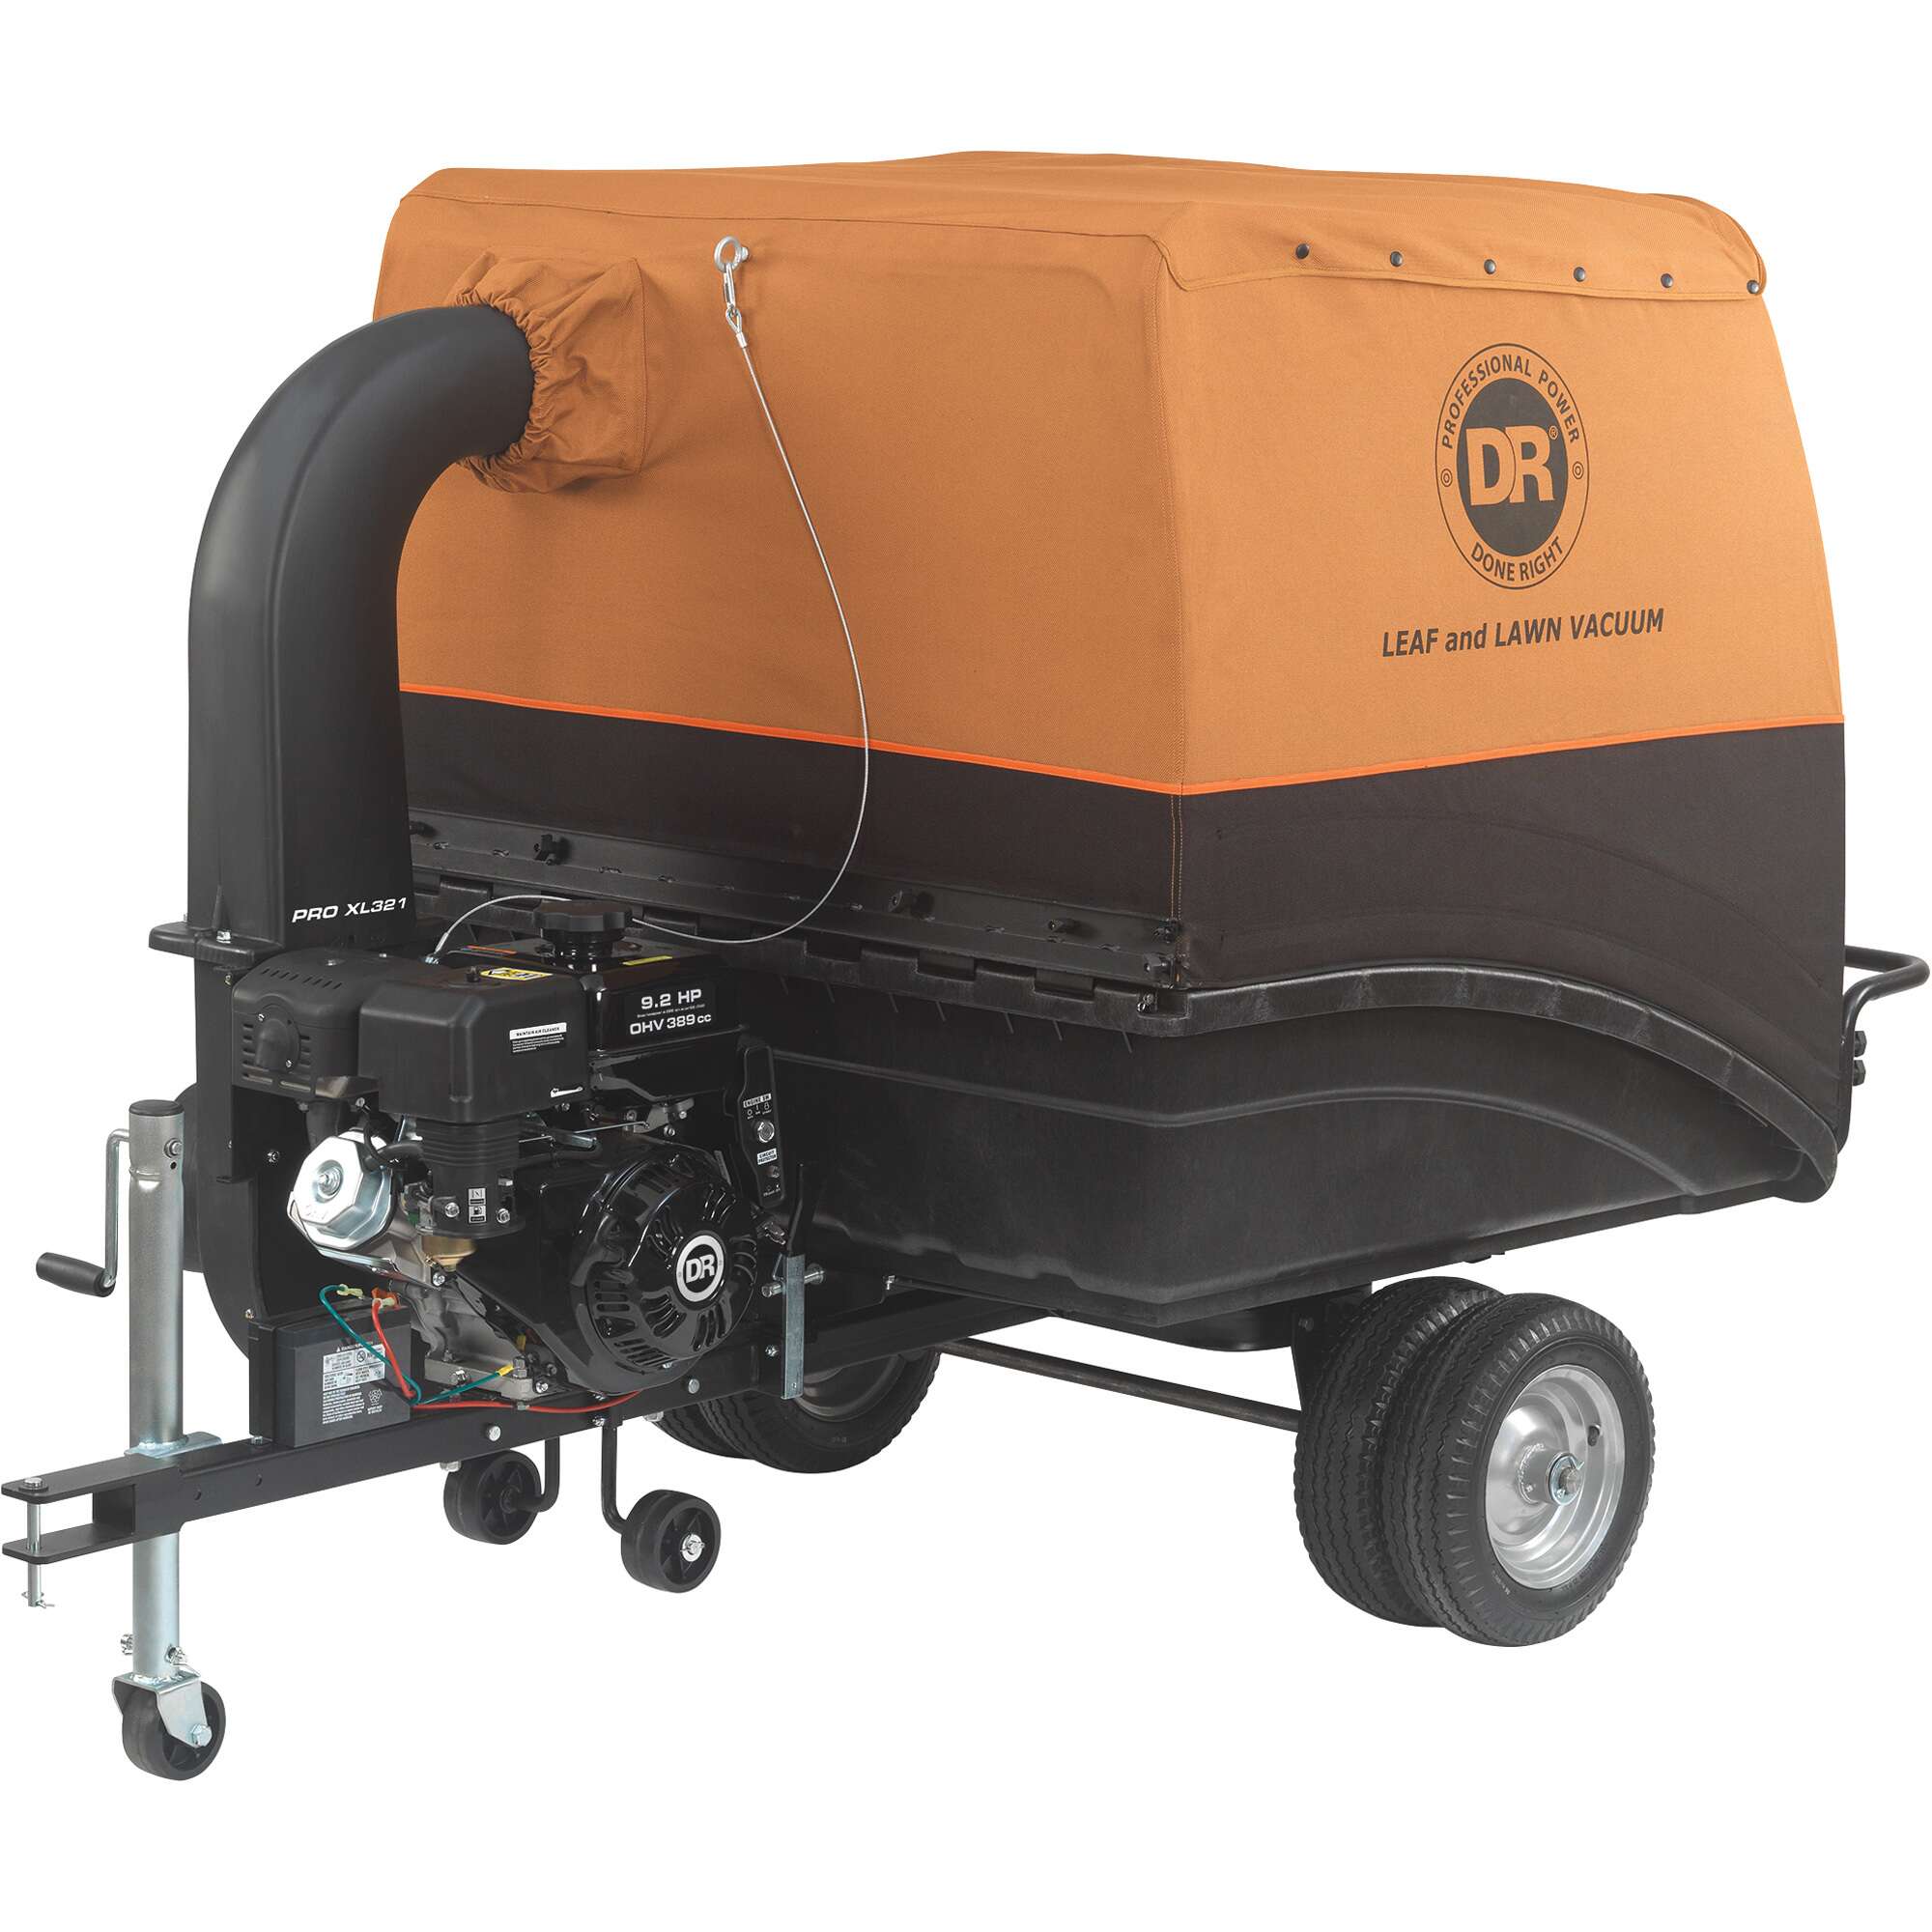 DR Power Pro XL321 Tow Behind Lawn and Leaf Vacuum 50inW 389cc Engine 321Gal Capacity